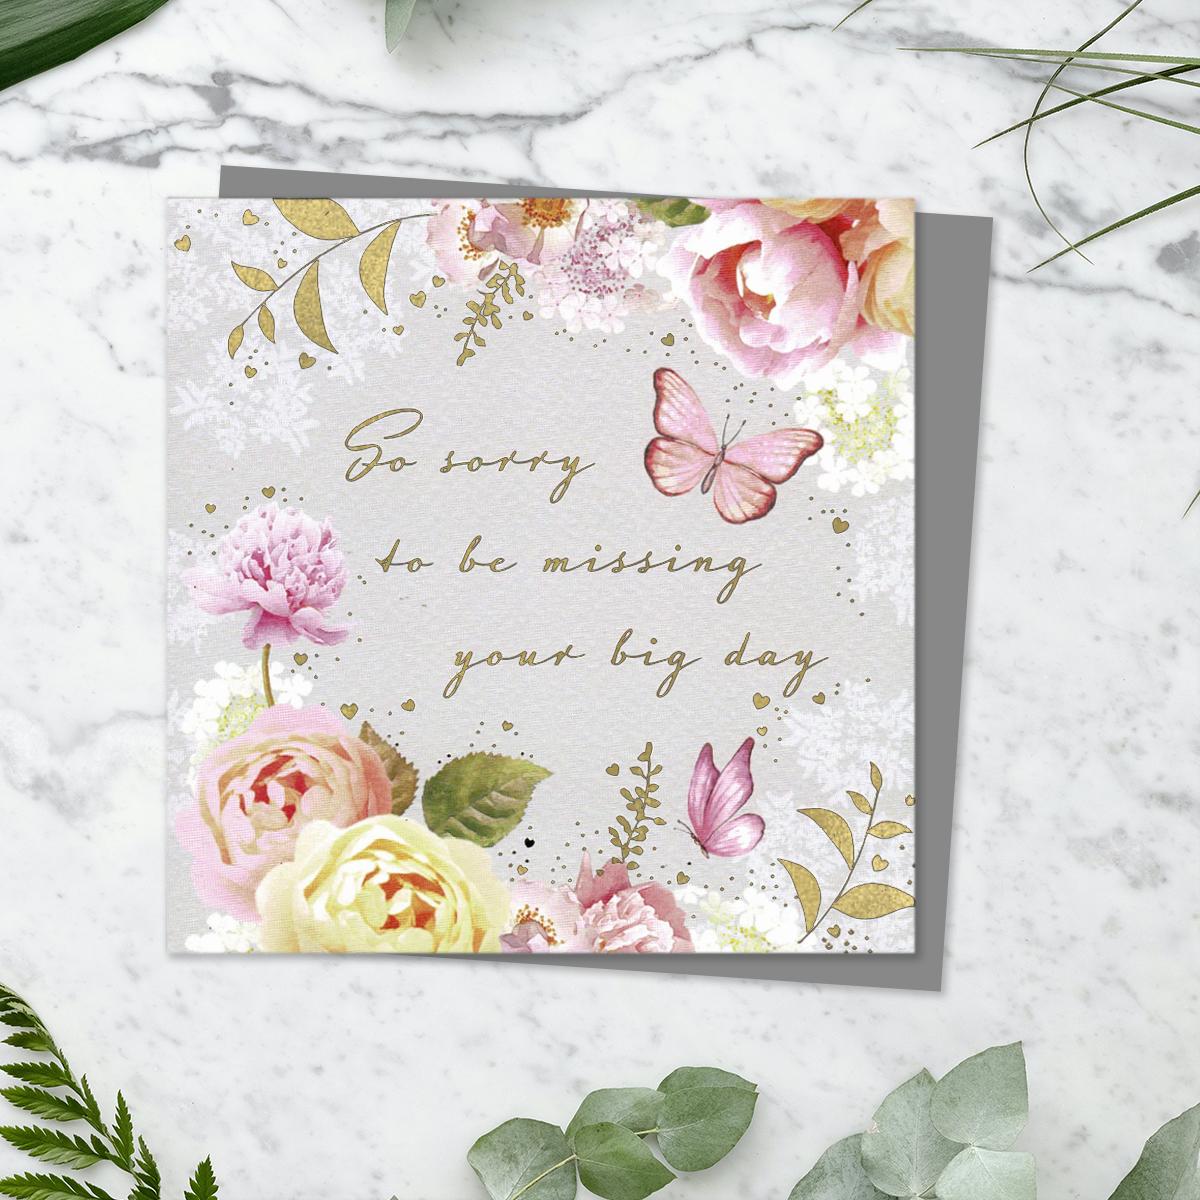 So Sorry To Be Missing Your Big Day Card Front Image